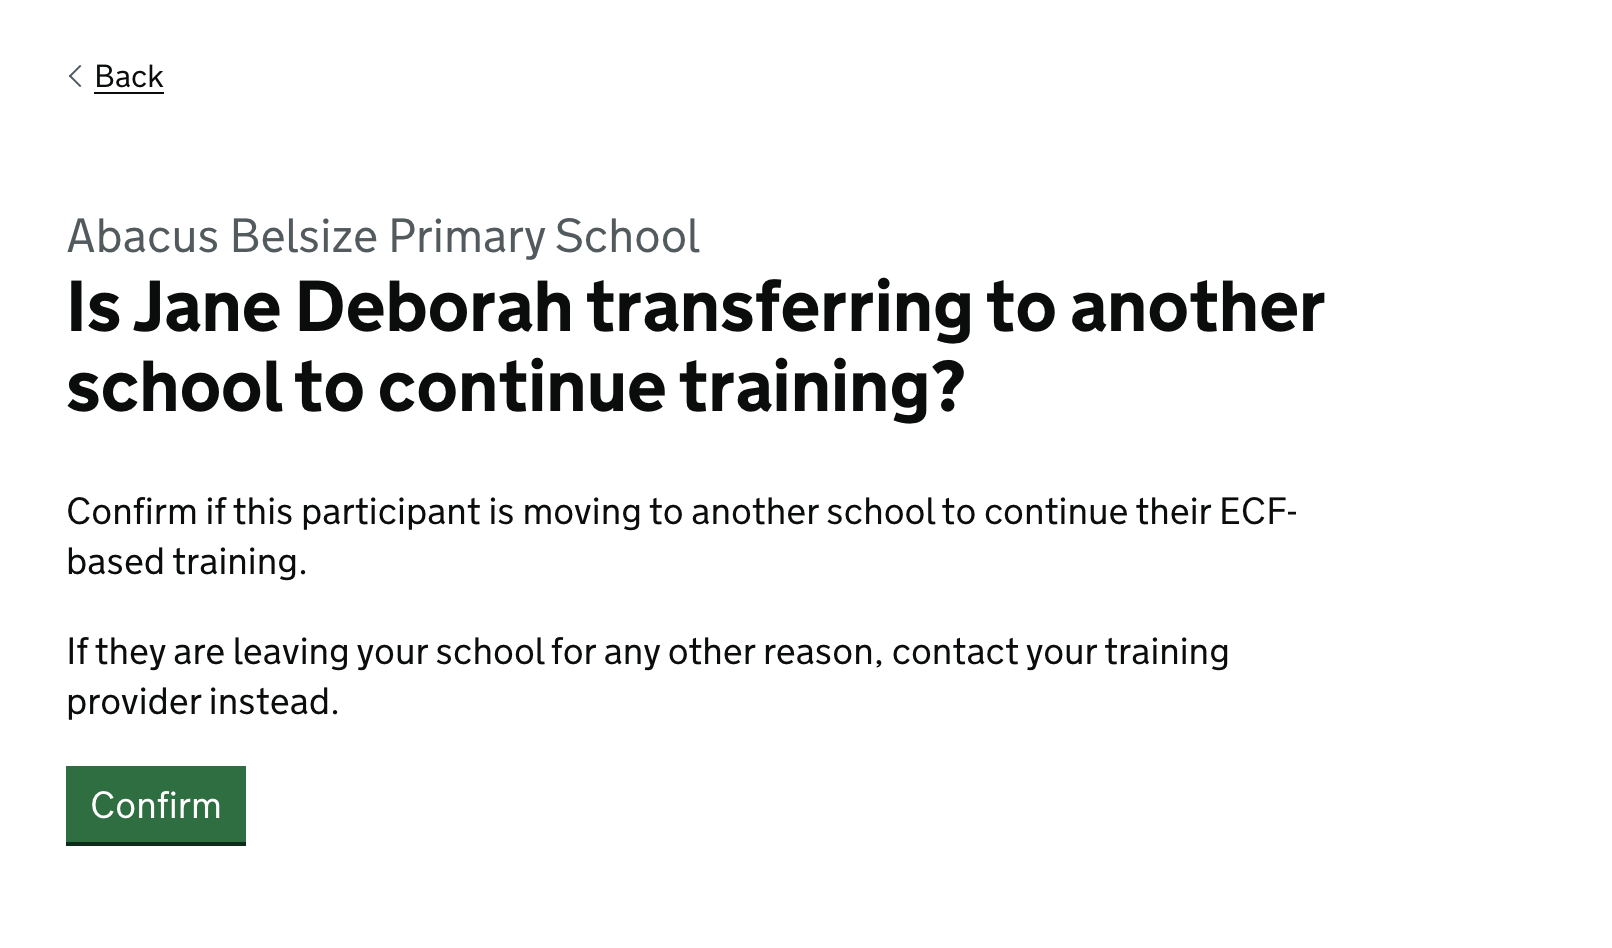 Screenshot saying ‘Is Jane Deborah transferring to another school to continue training?’ followed by ‘Confirm if this participant is moving to another school to continue their ECF-based training.
If they are leaving your school for any other reason, contact your training provider instead.’